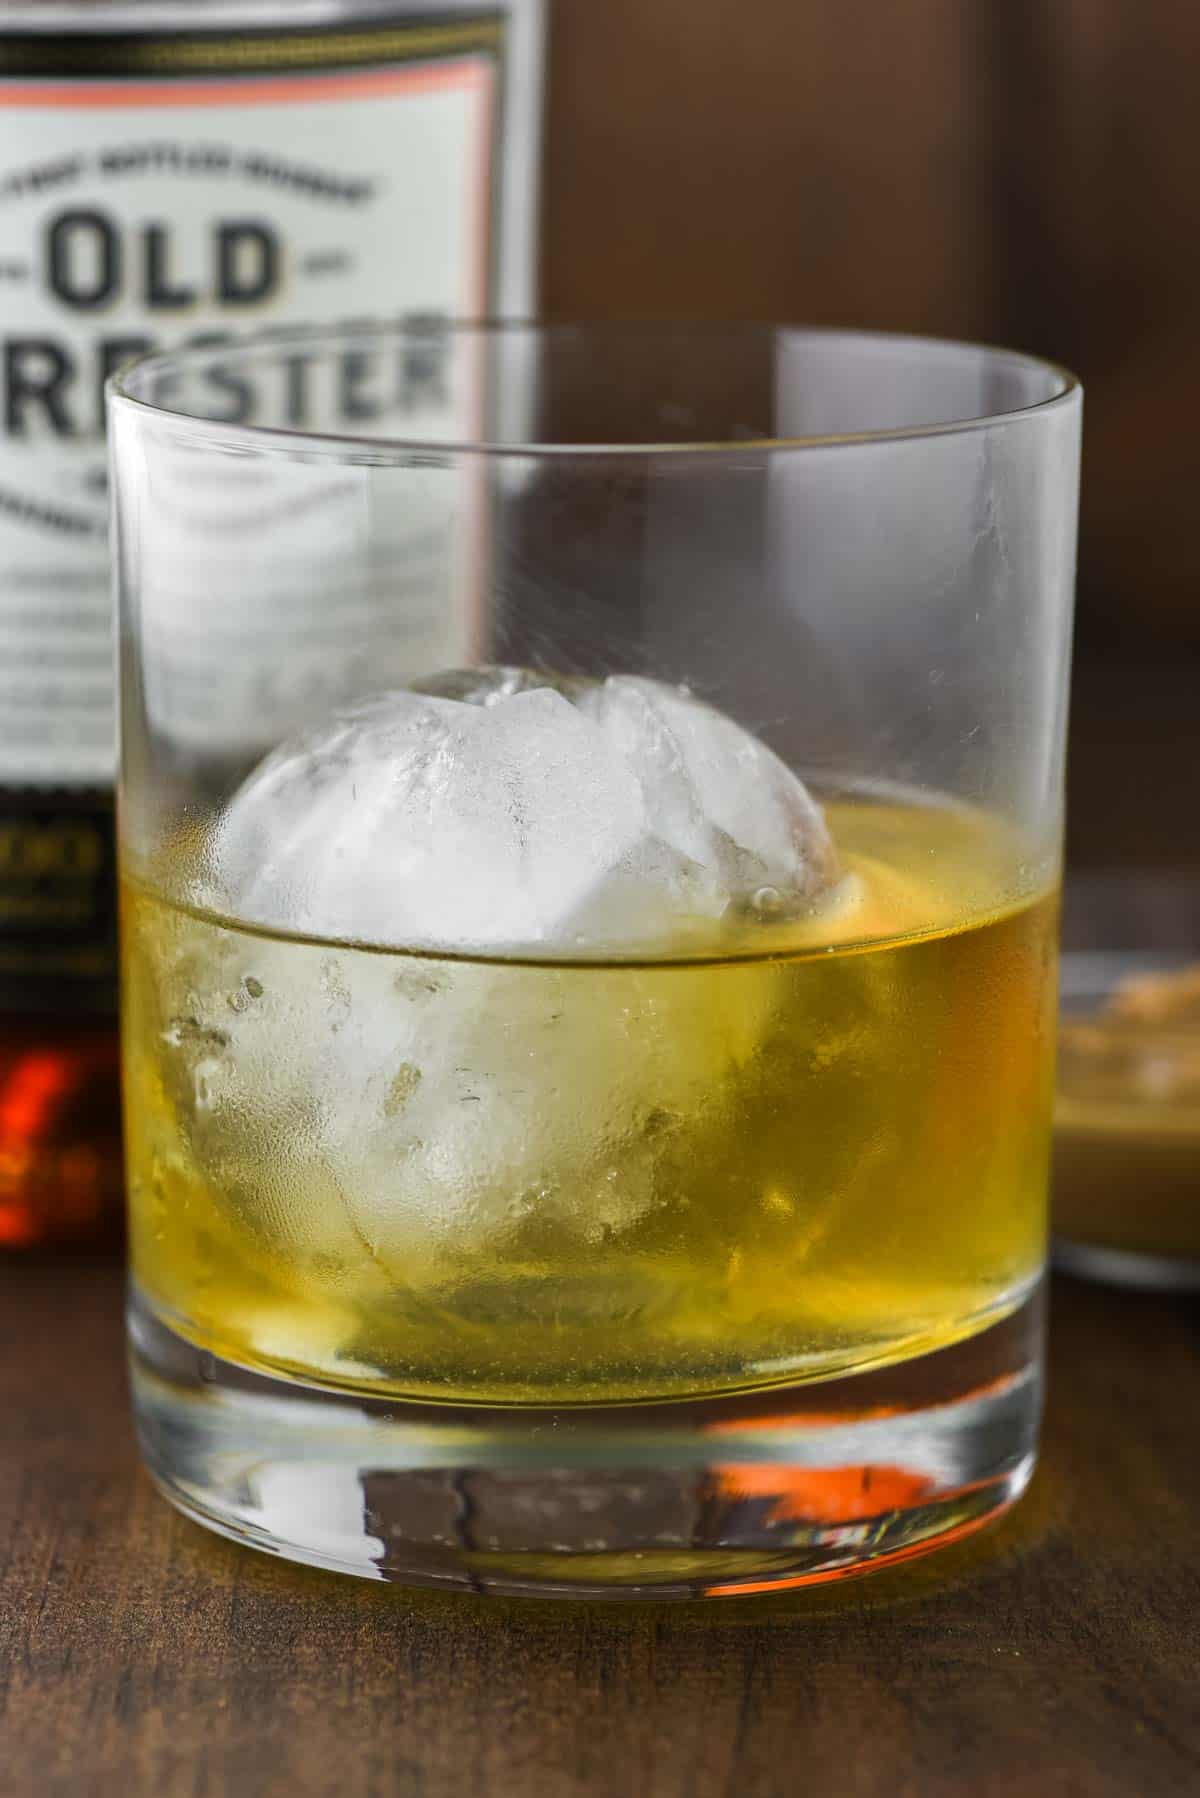 On Making The Perfect Ice For Your Whiskey Or Cocktail - The Whiskey Wash